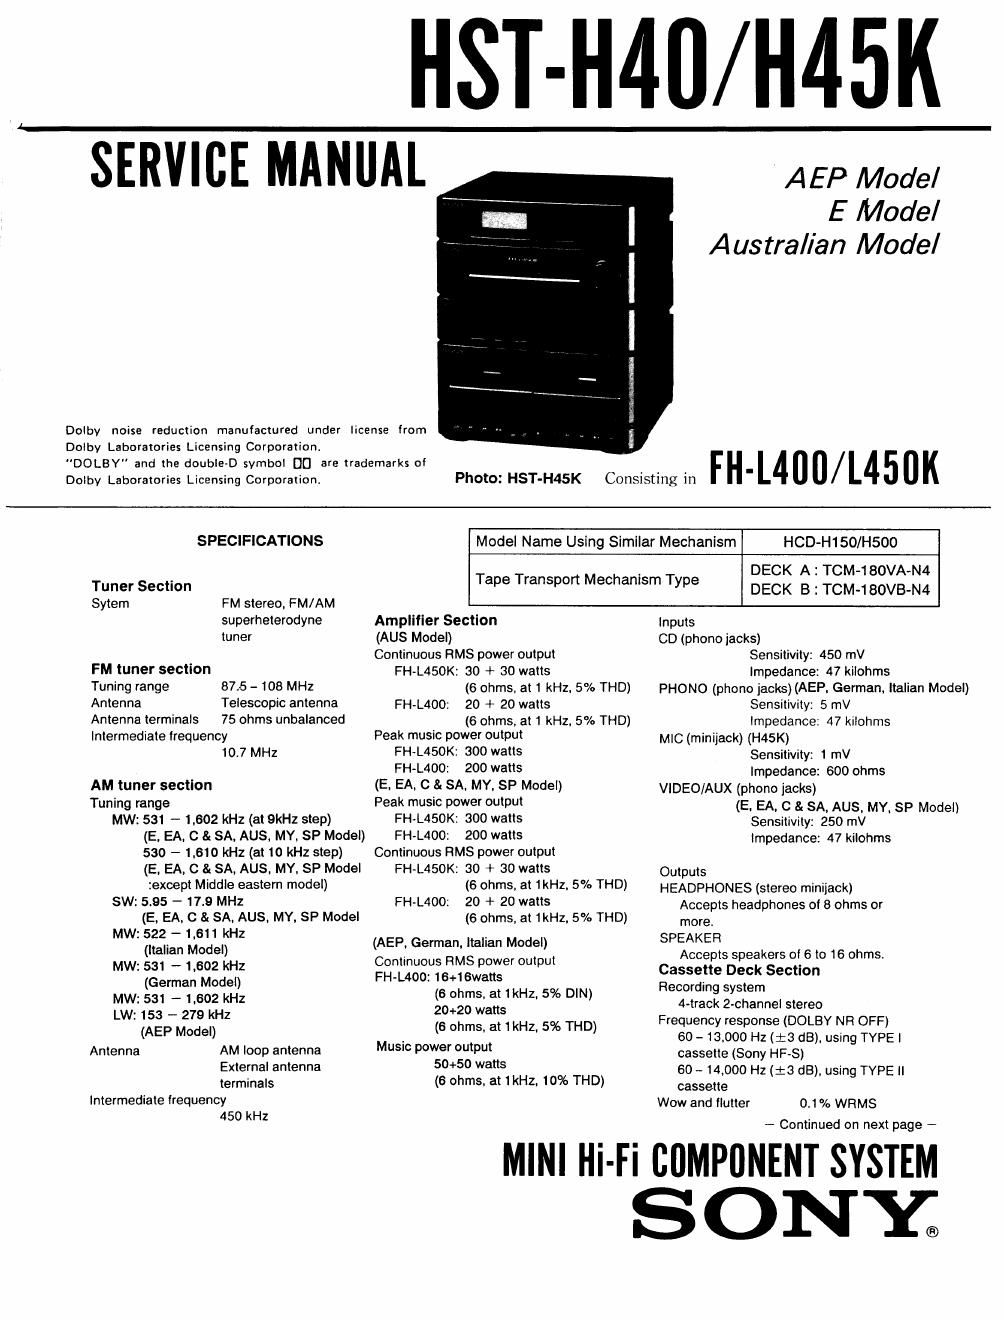 sony hsth 40 service manual